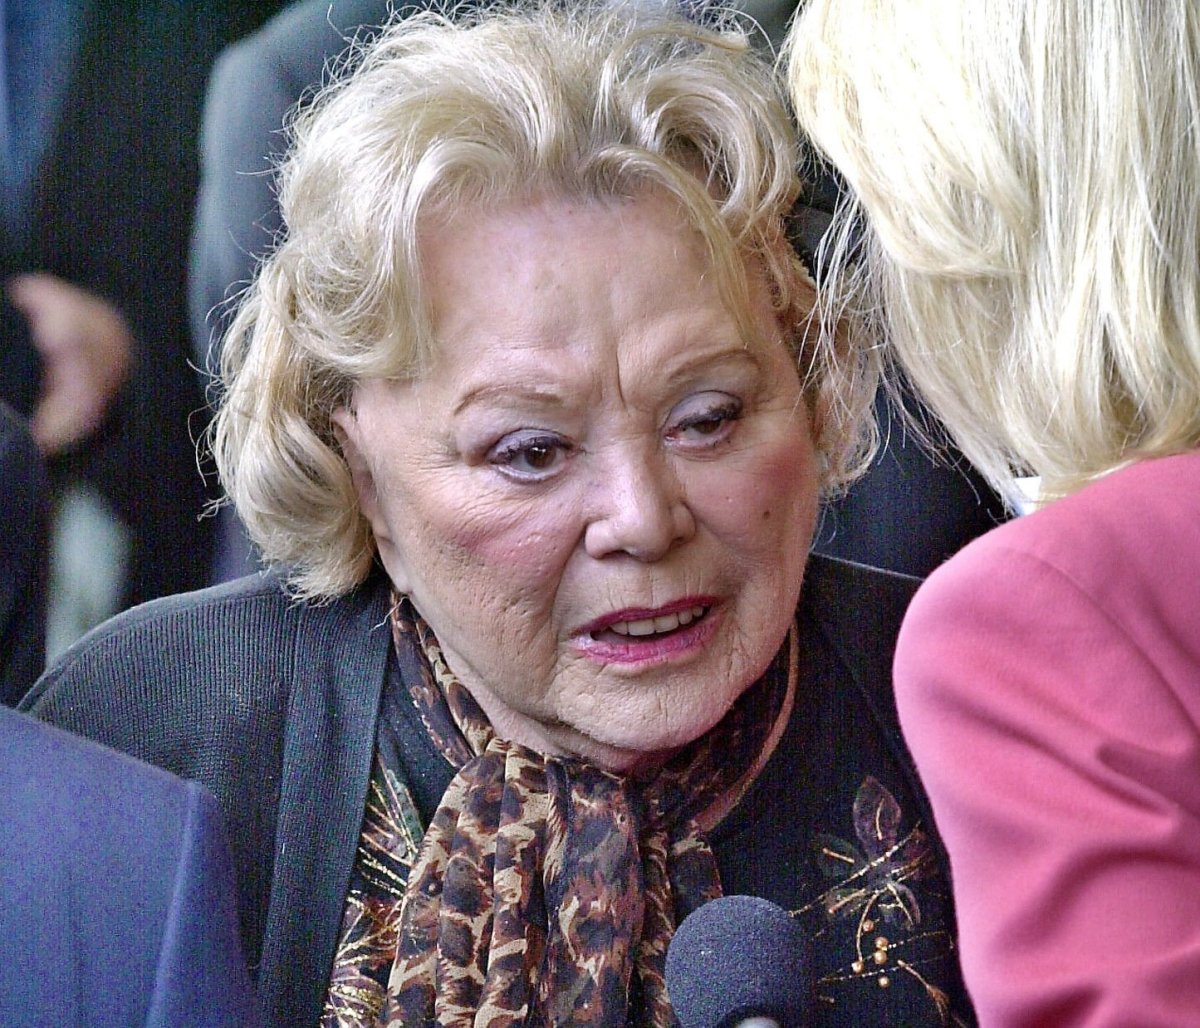 Actress and comedian Rose Marie talks to the press in April 2002 as she arrives for a ceremony honouring comedian Milton Berle at Hillside Memorial Park and Mortuary in Los Angeles.